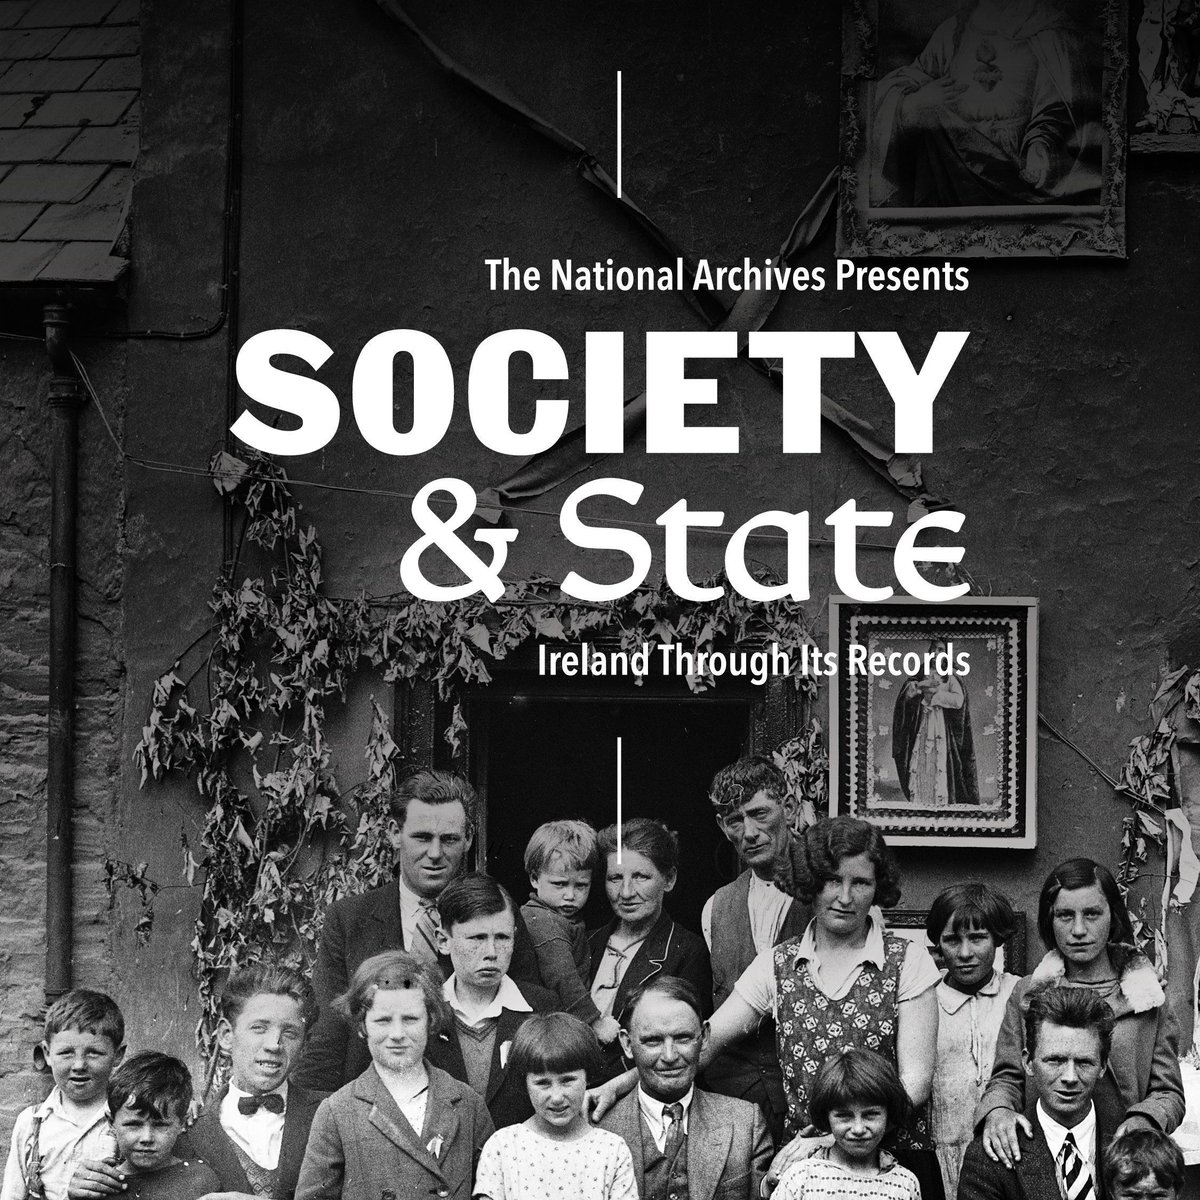 We're really excited about our new exhibition 'Society & State - Ireland Through Its Records' which will open in Dublin Castle's Coach House Gallery on 17 April and run until 8 September. Read all about it at buff.ly/3U2831E! @DeptCultureIRL #SocietyAndStateIRL